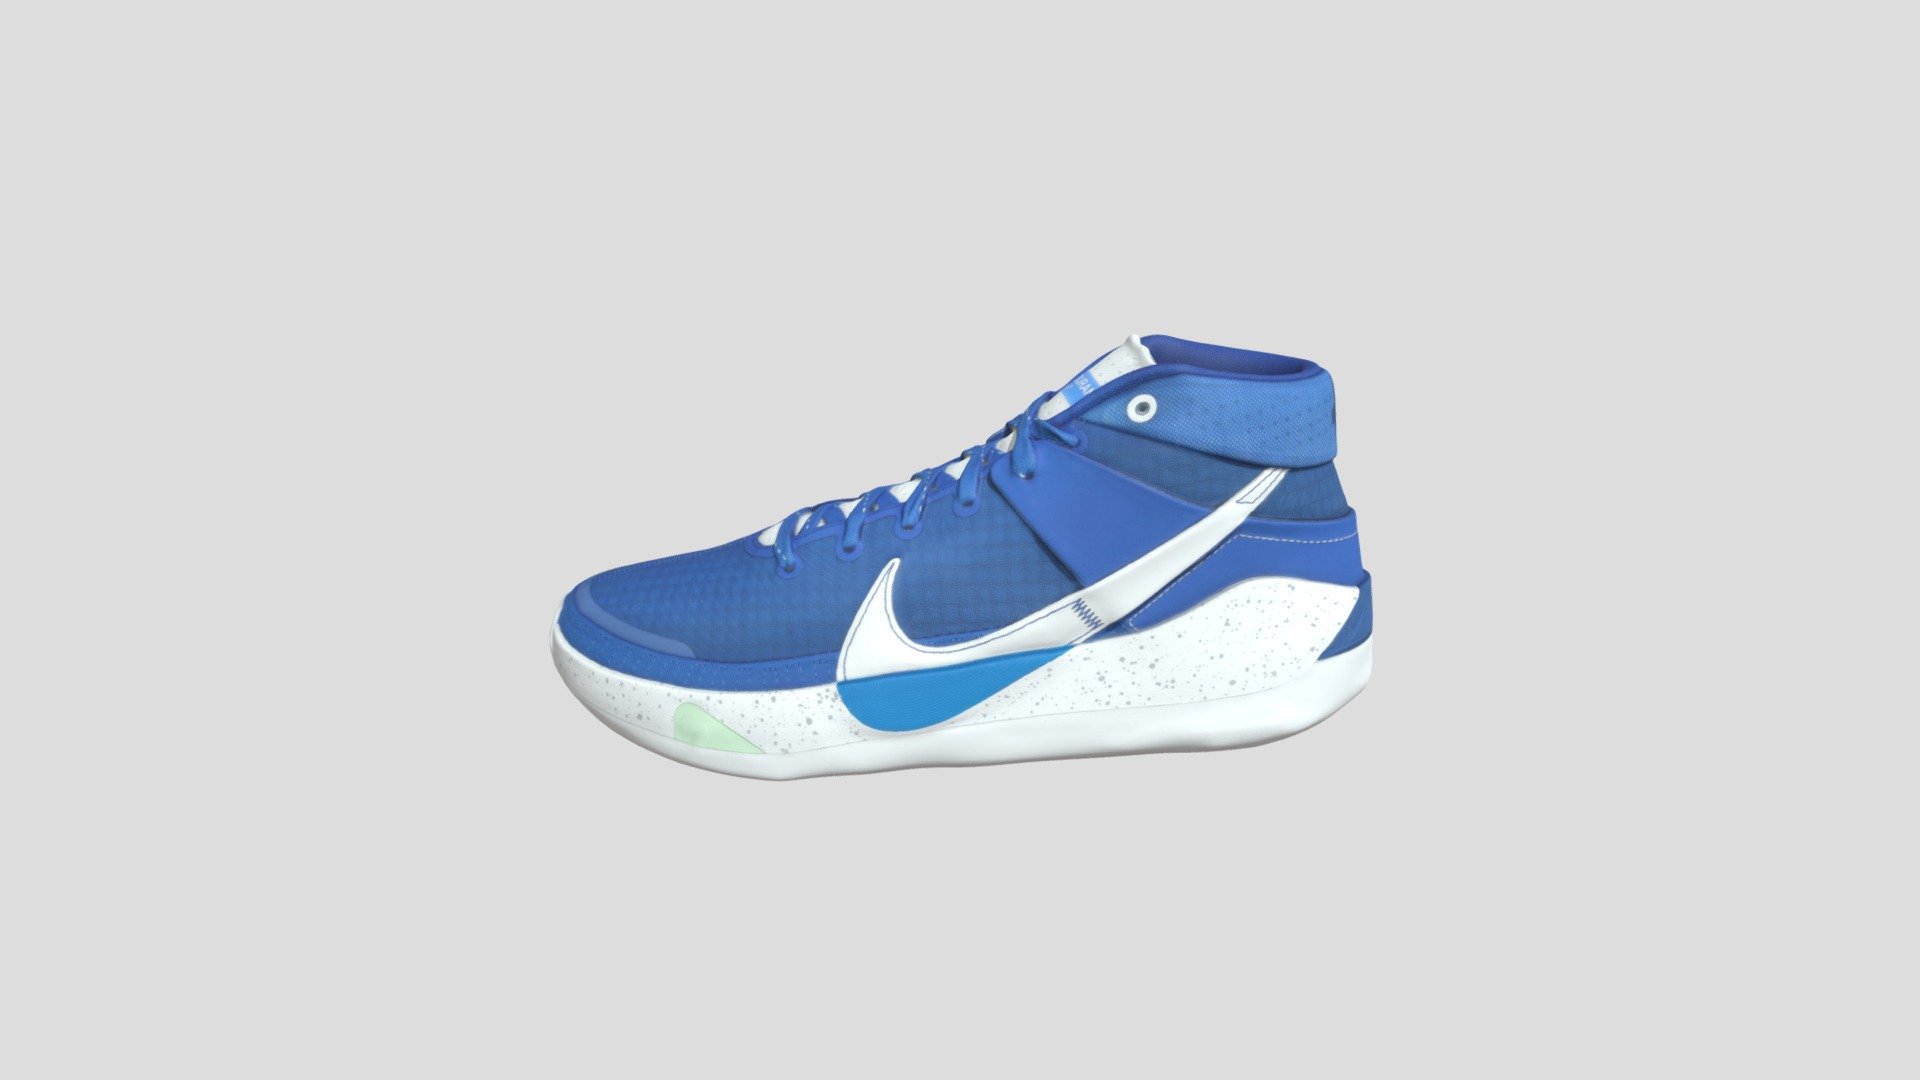 This model was created firstly by 3D scanning on retail version, and then being detail-improved manually, thus a 1:1 repulica of the original
PBR ready
Low-poly
4K texture
Welcome to check out other models we have to offer. And we do accept custom orders as well :) - Nike KD13 Team Game Royal 皇家蓝 国外版_CK6017-401 - Buy Royalty Free 3D model by TRARGUS 3d model